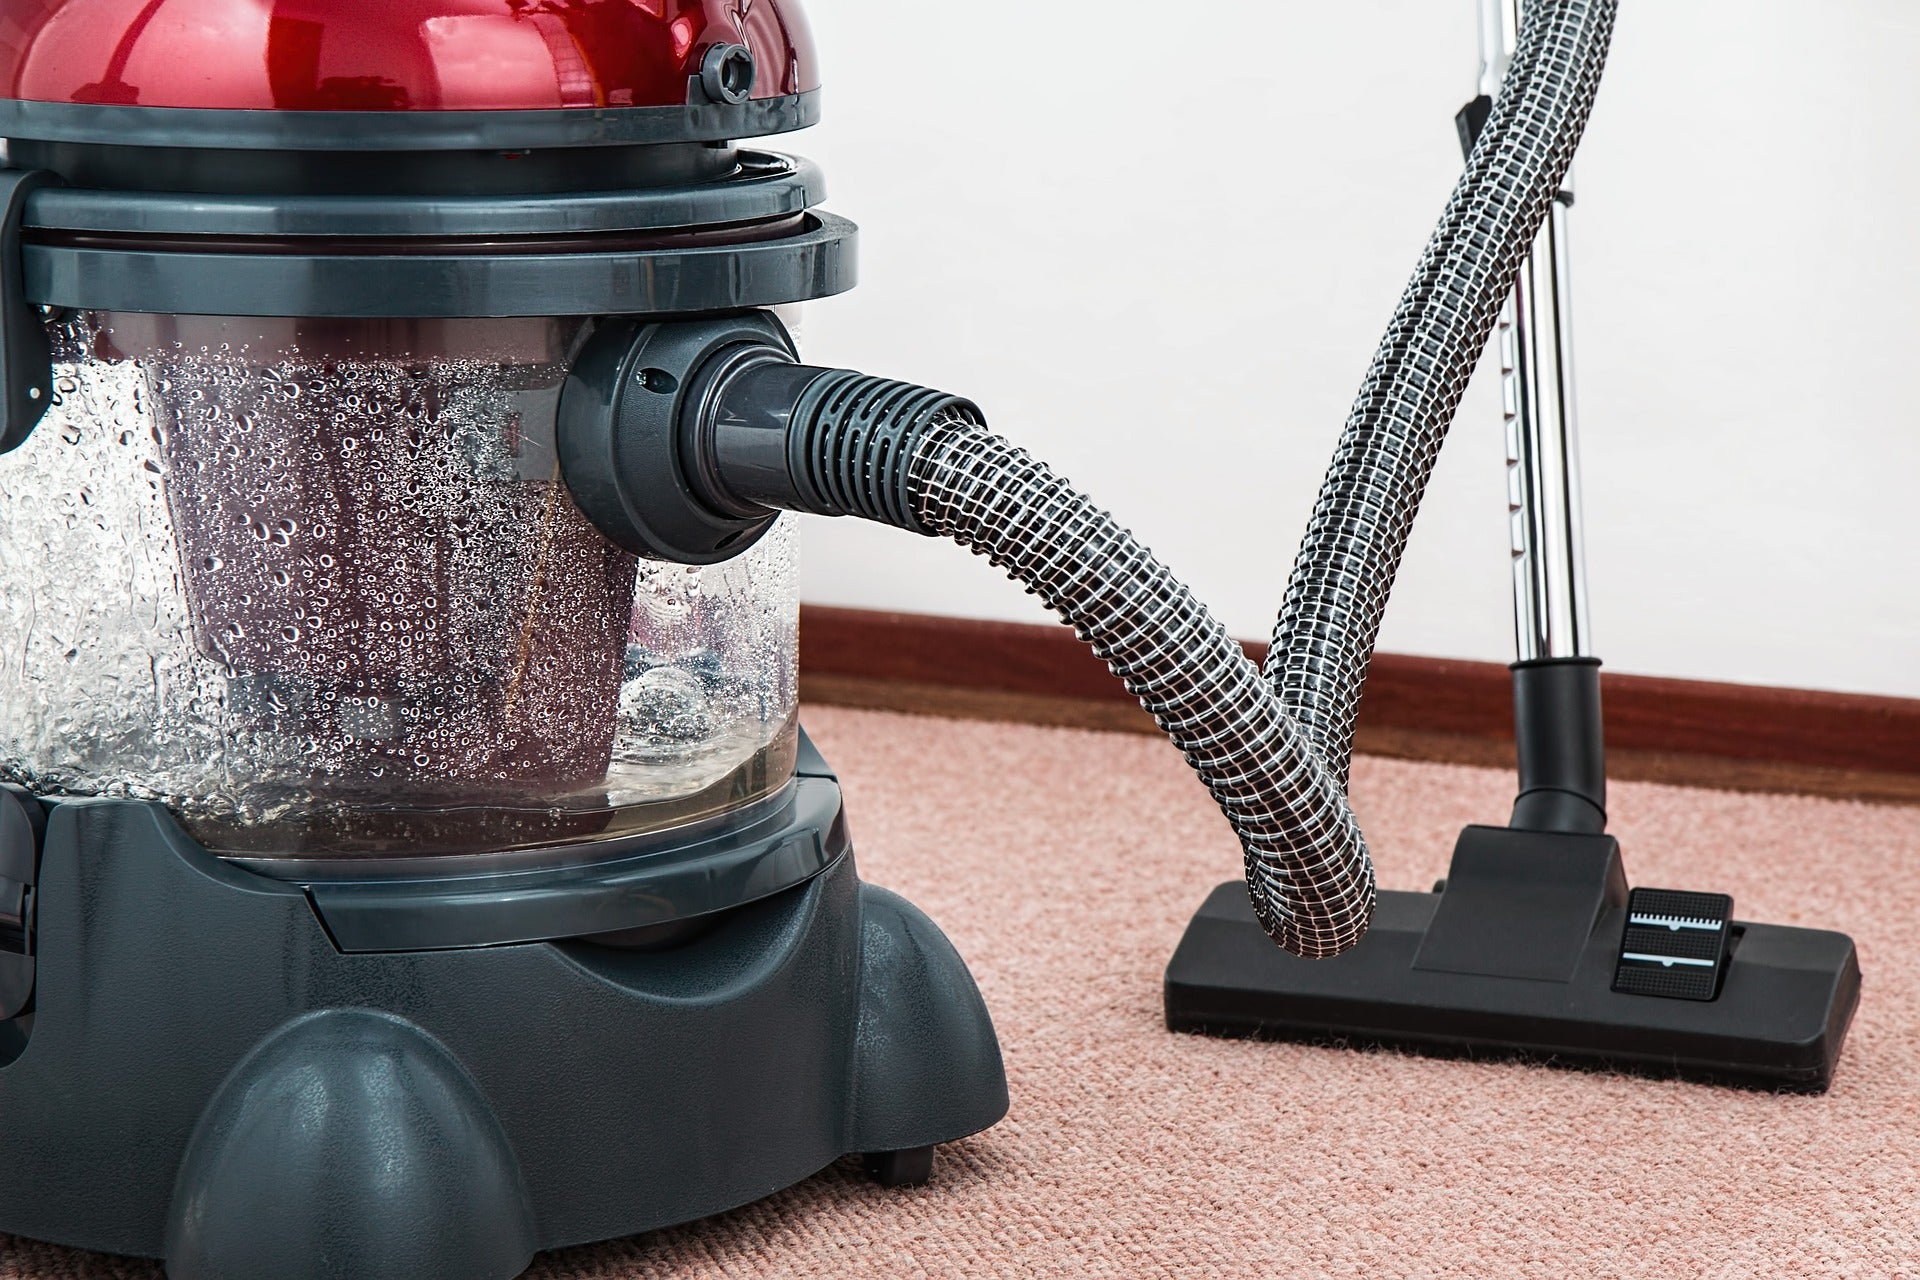 Vacuum cleaner with water filter